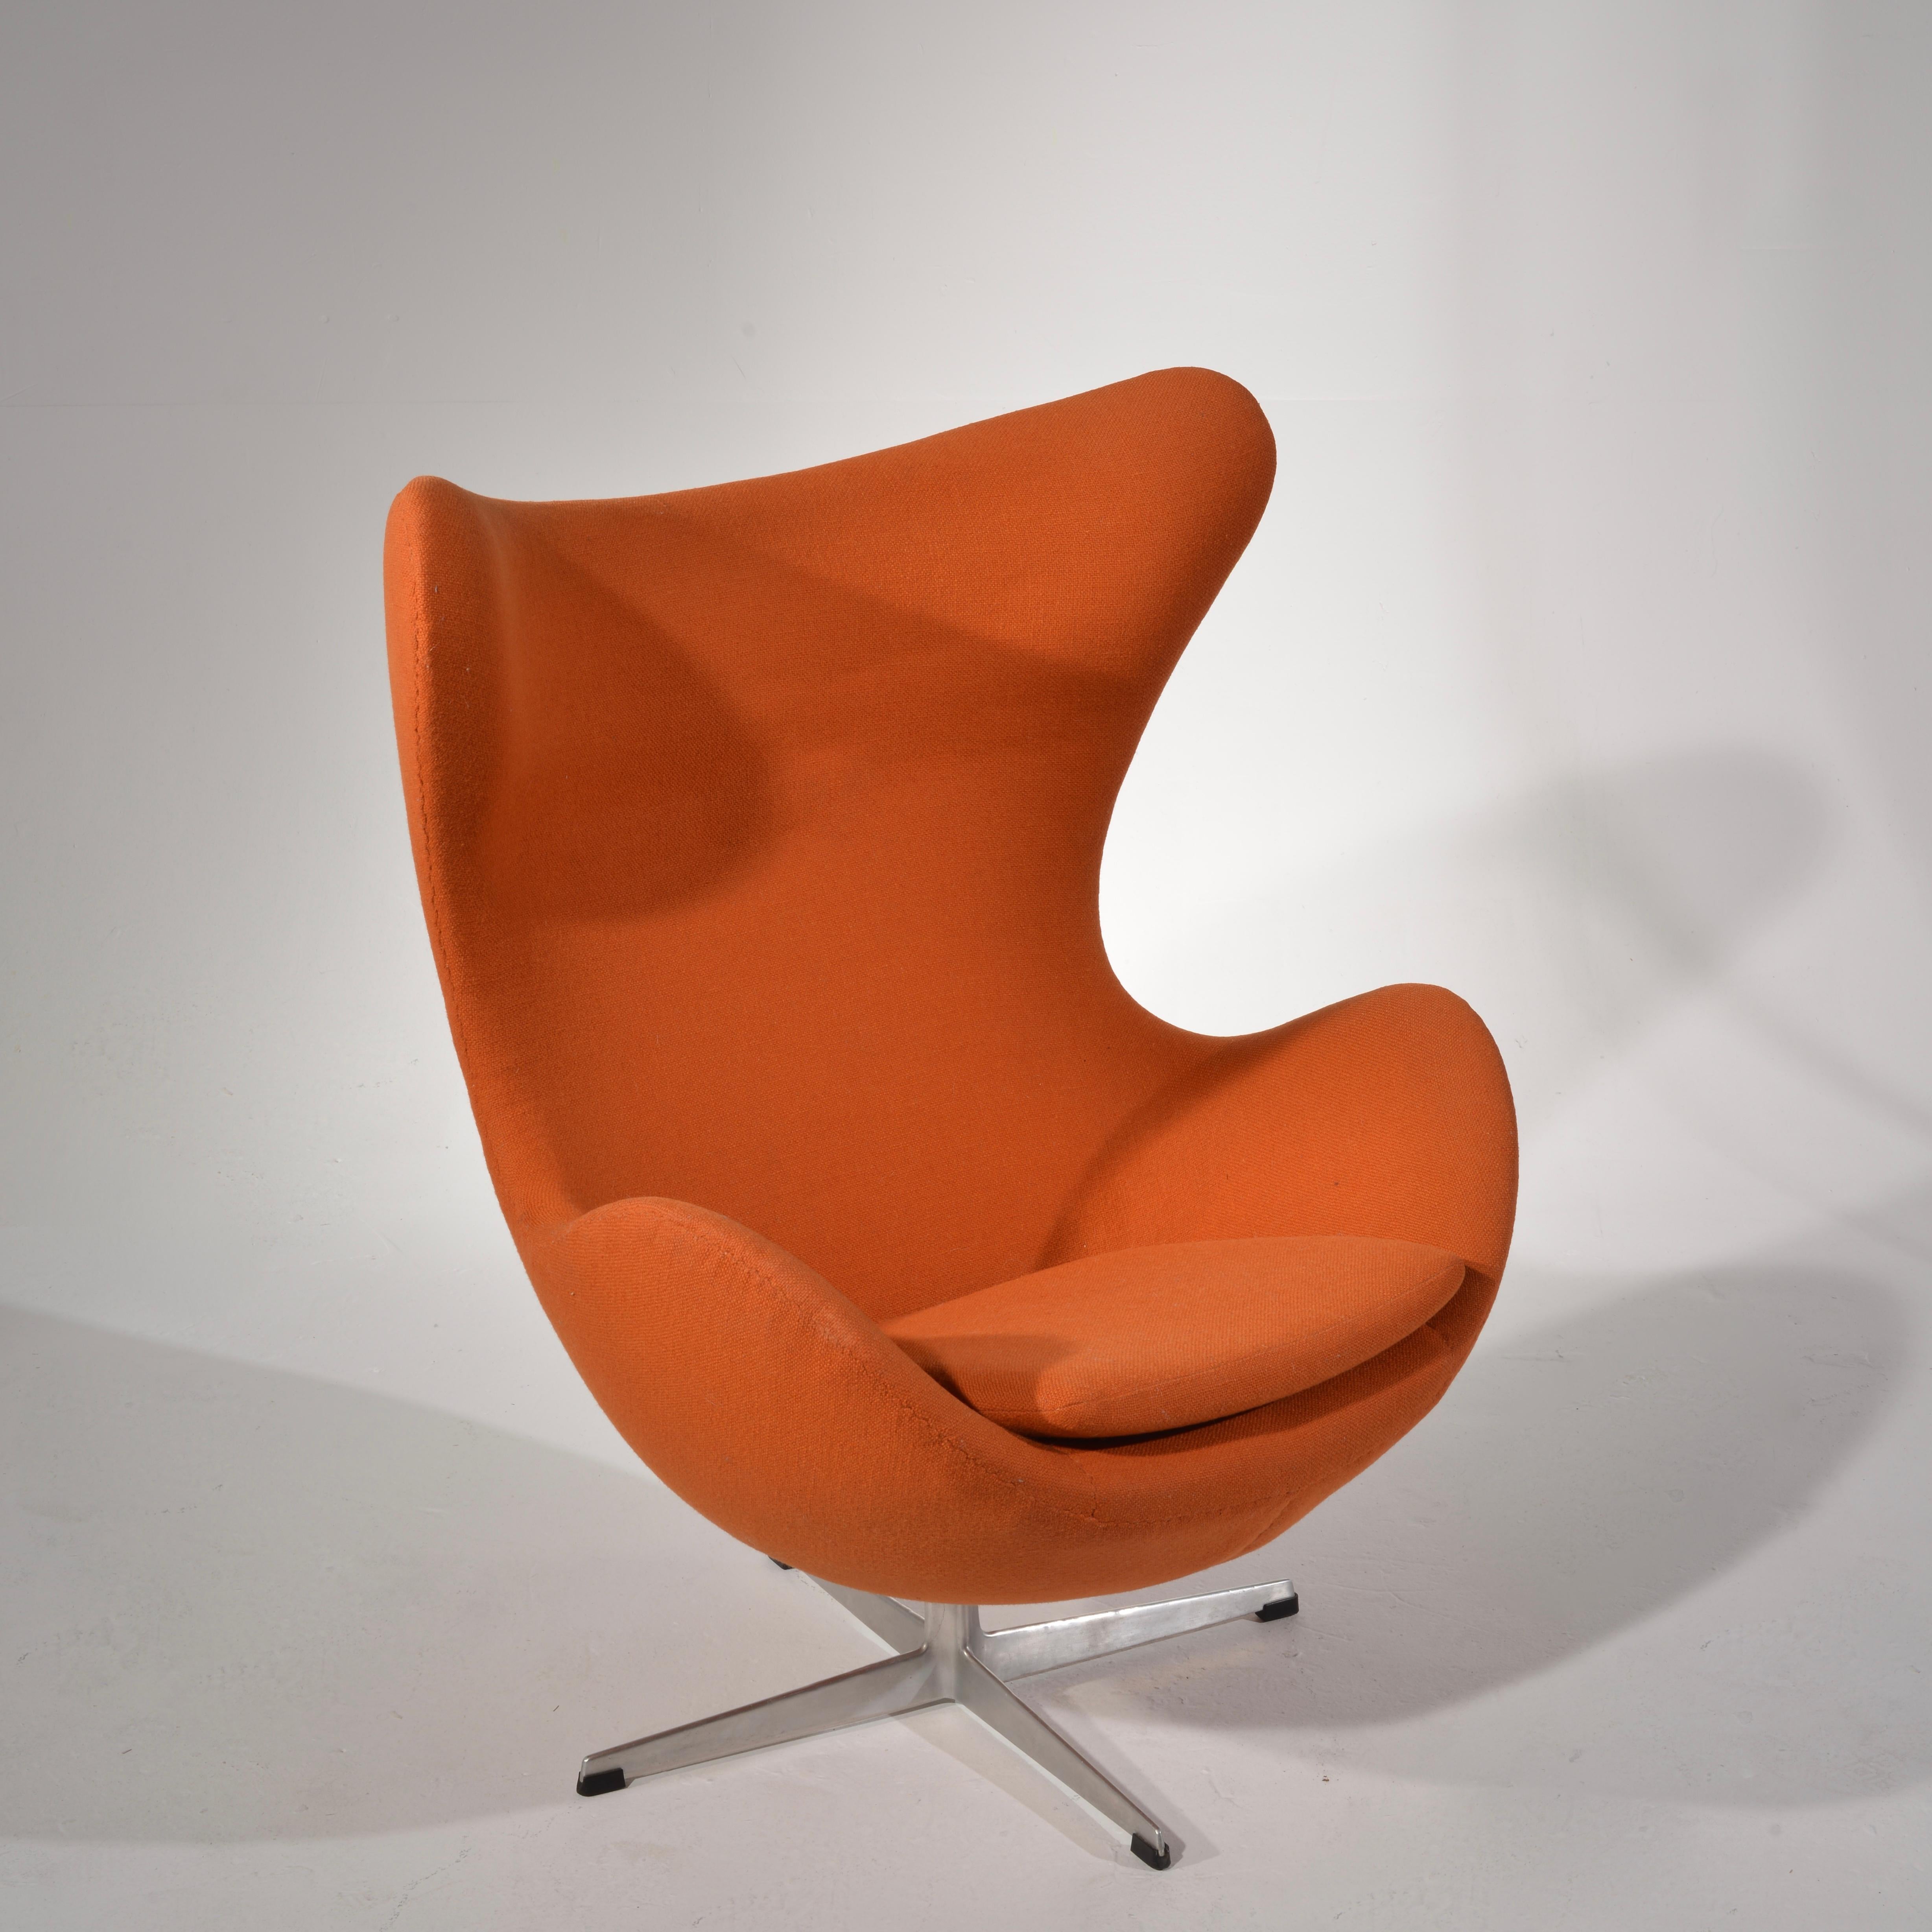 A midcentury armchair designed by Arne Jacobsen and produced by Fritz Hansen.